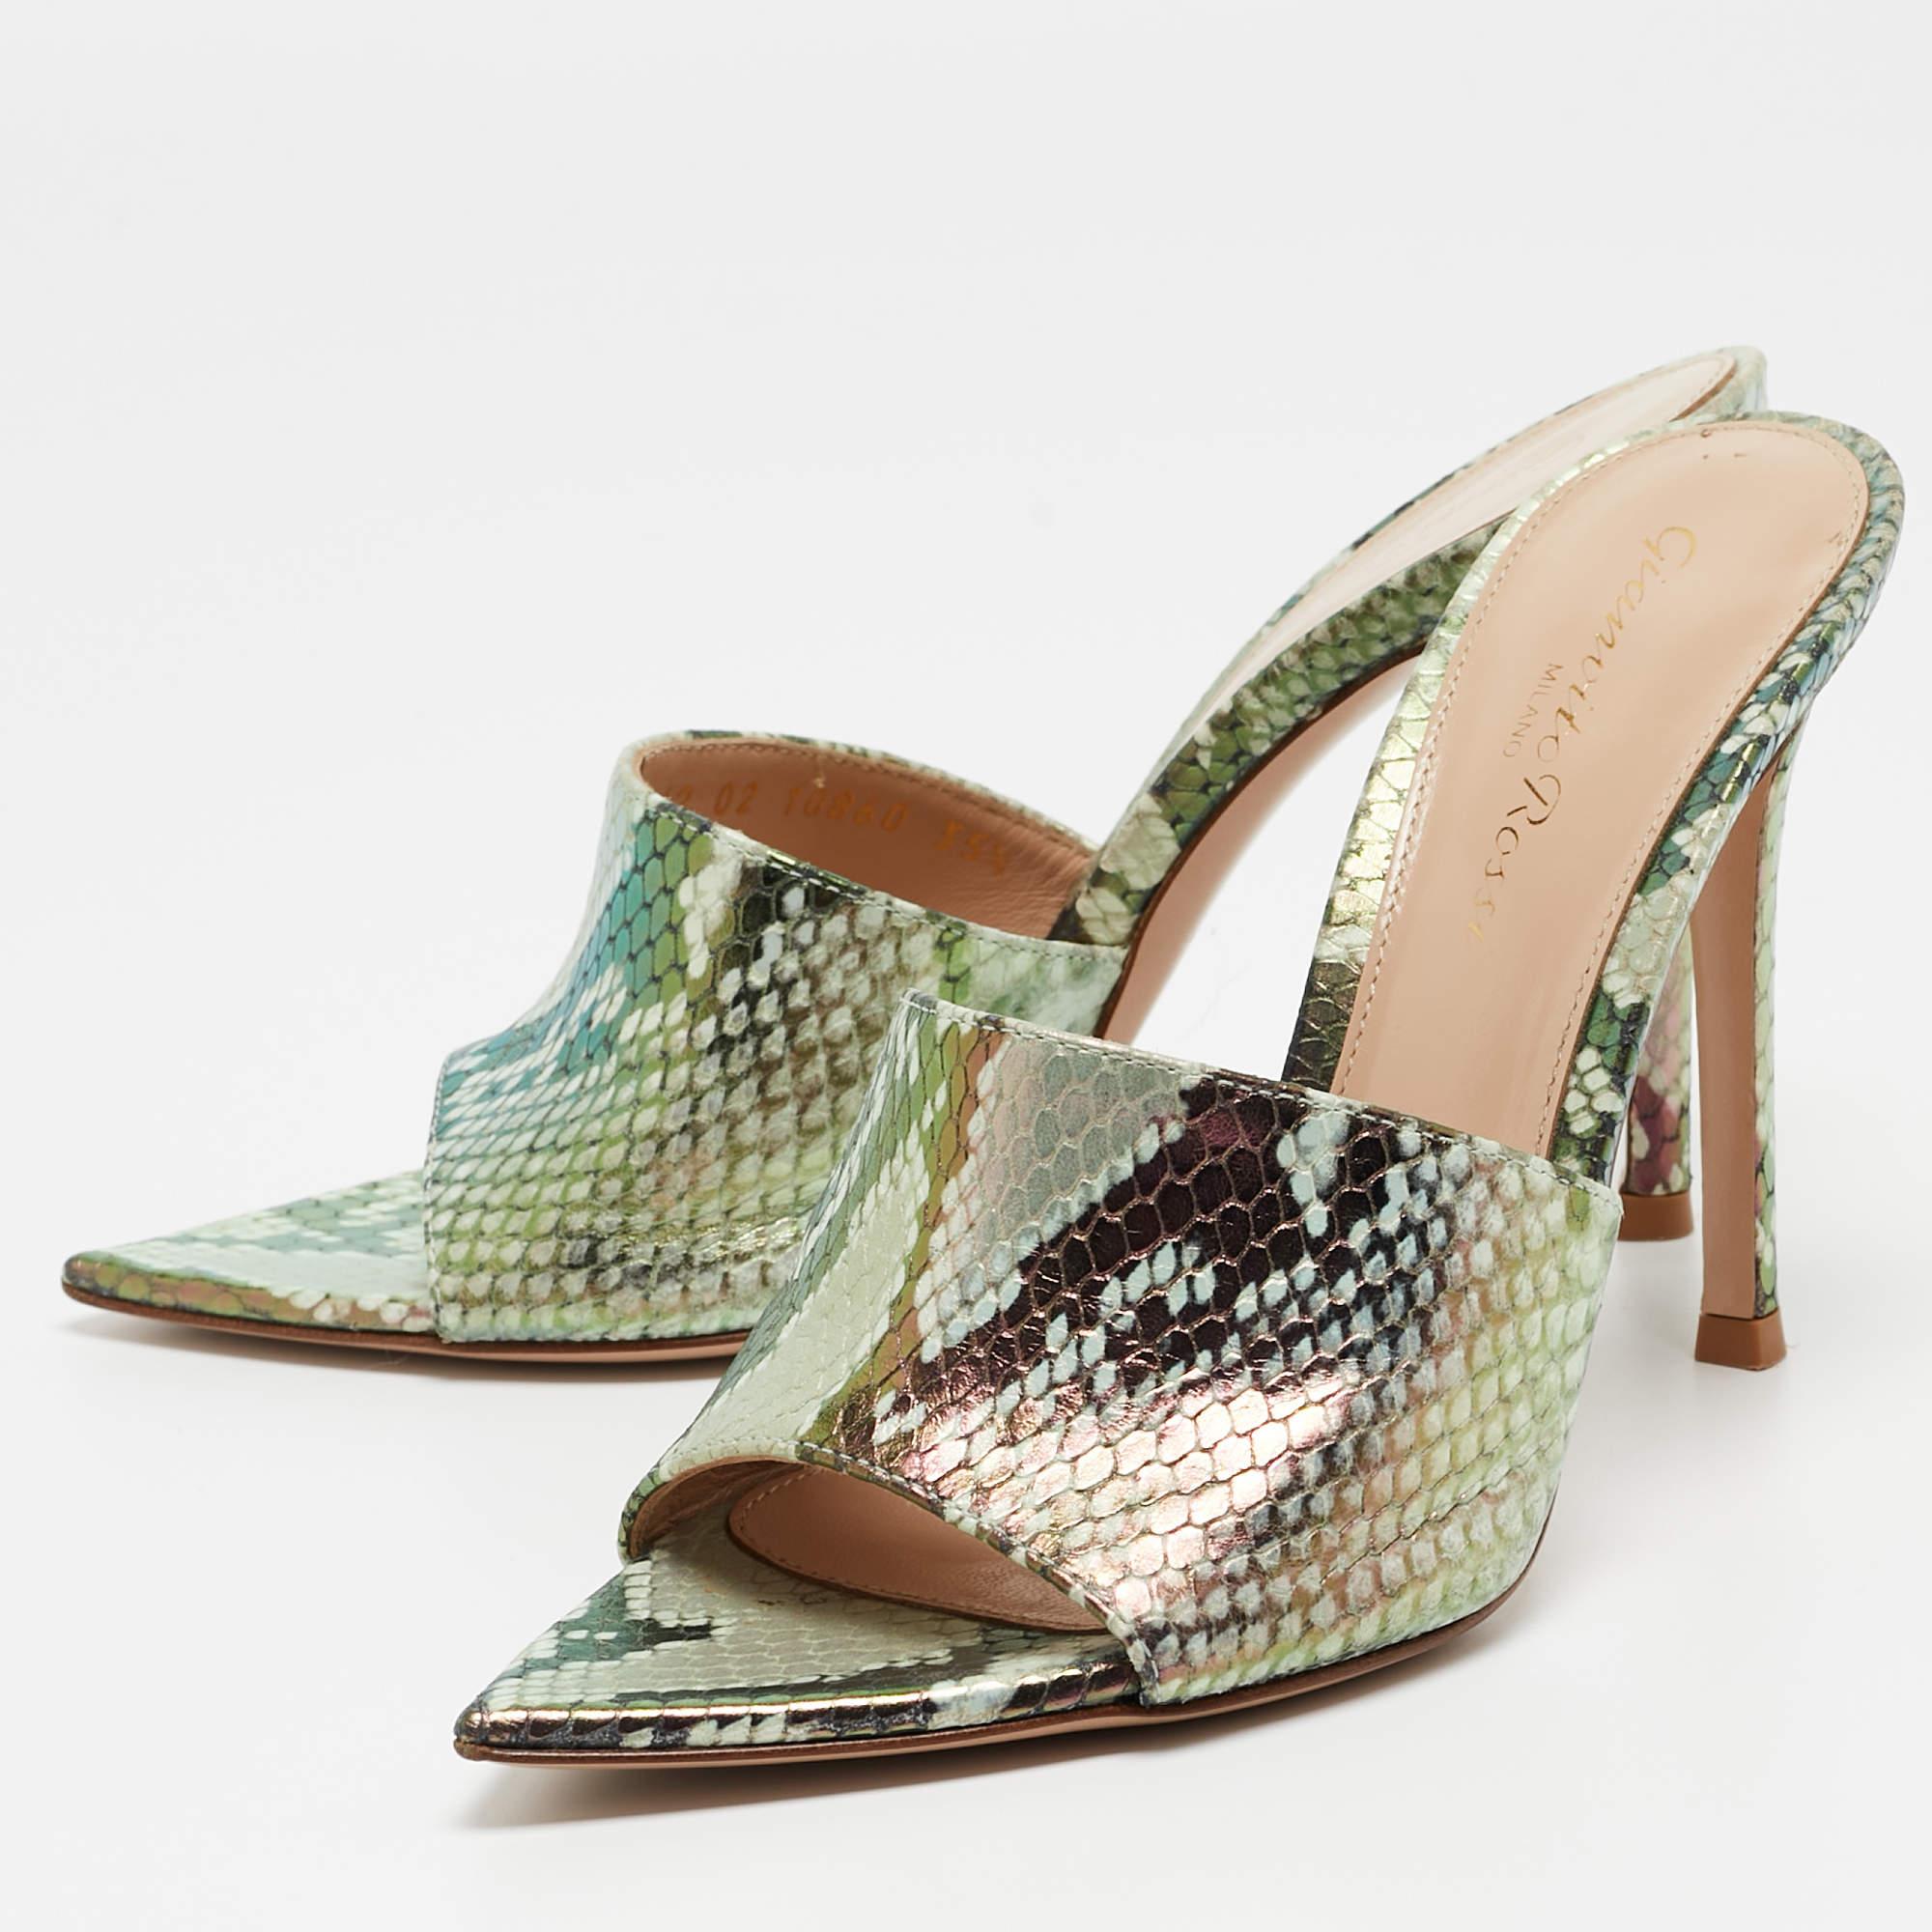 These Gianvito Rossi Alise sandals are chic and constructed with care for a great fit. Crafted from quality materials, they are durable, easy to style, and fabulous, with comfortable interiors, artful designs, and beautiful uppers.

